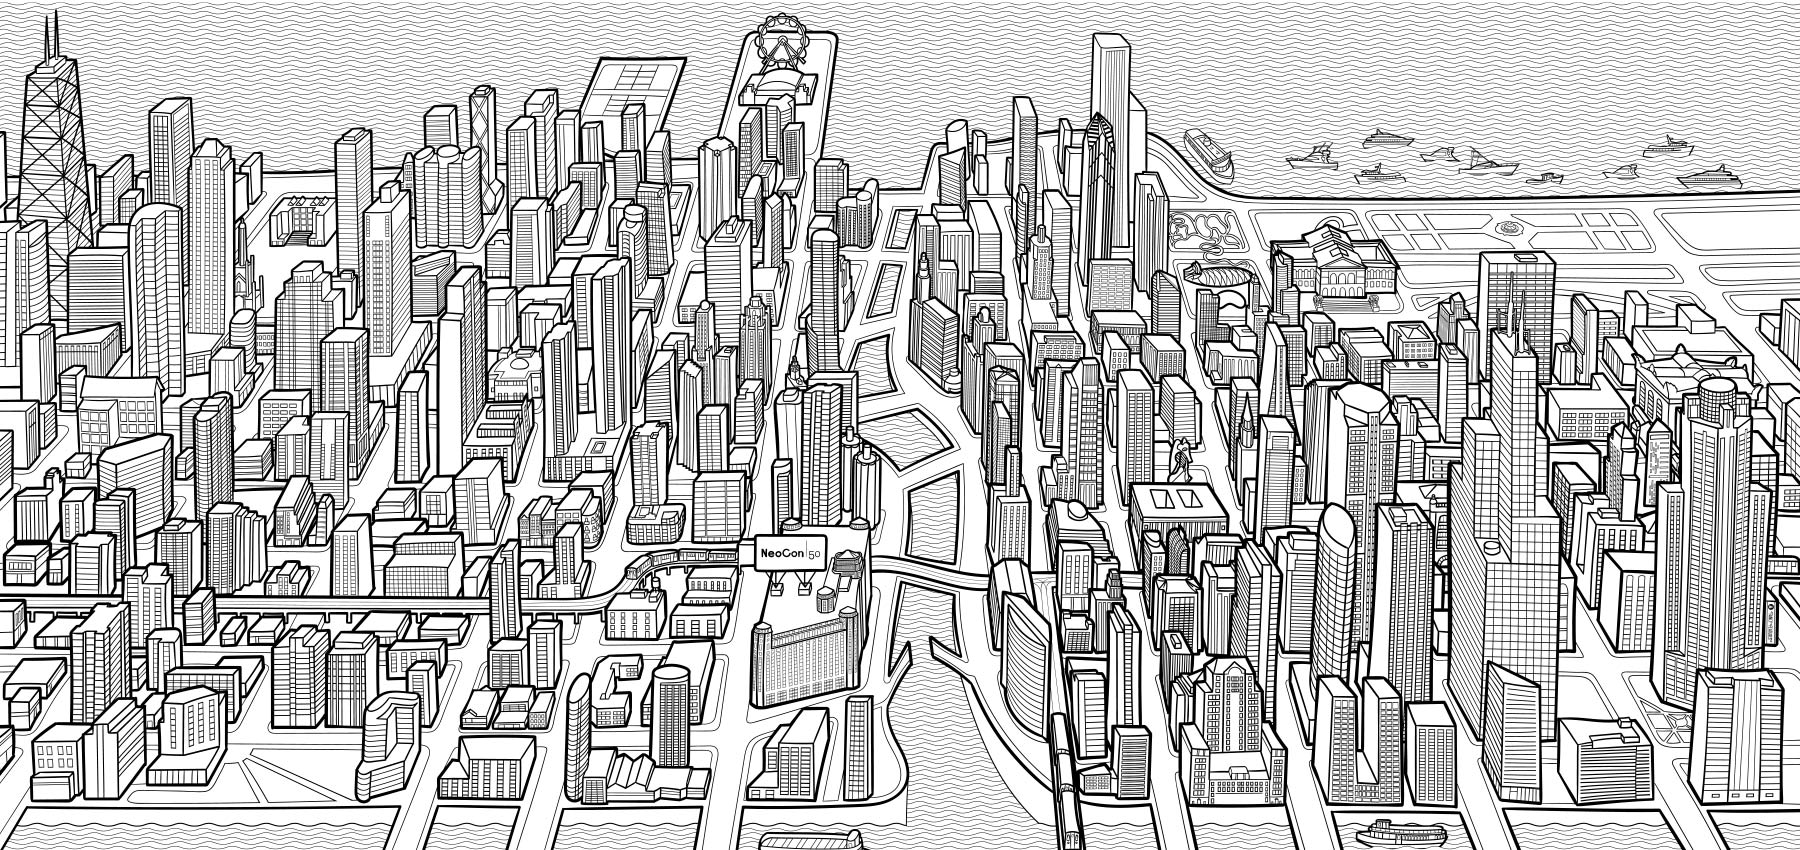 fancy features custom cityscape illustration chicago